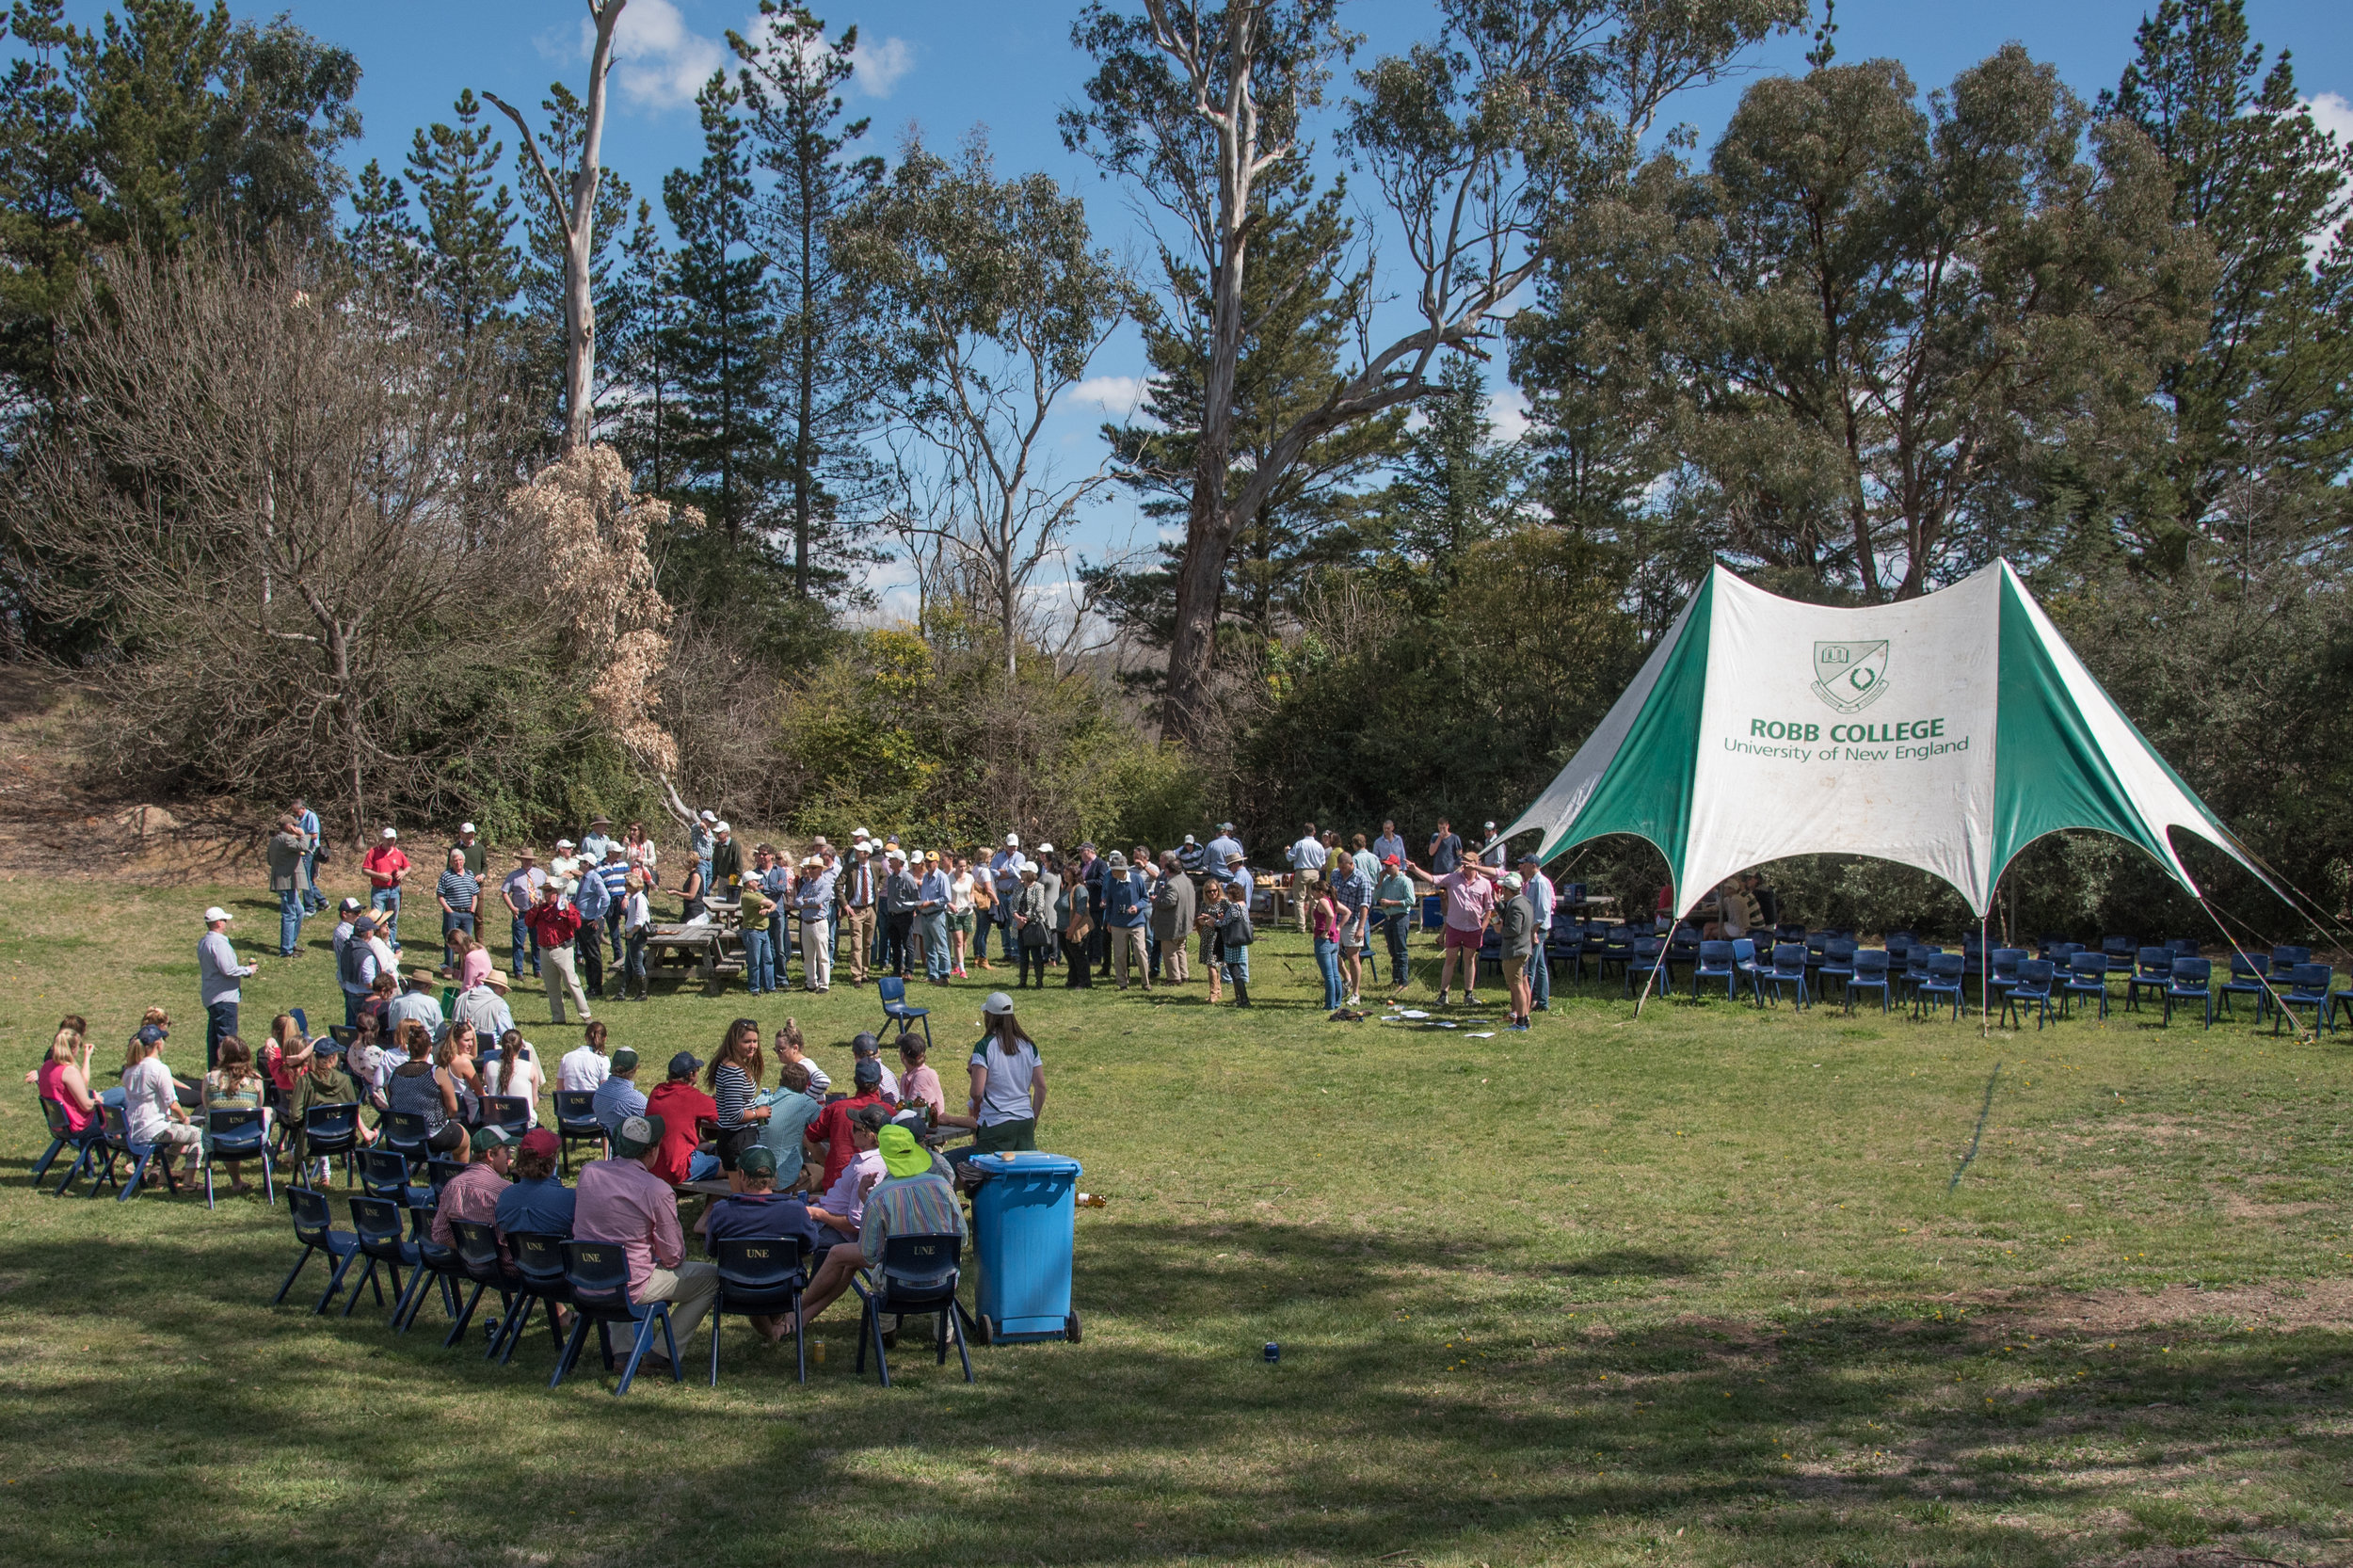  Robb College Tent surrounded by people during 2015 Alumni Reunion    